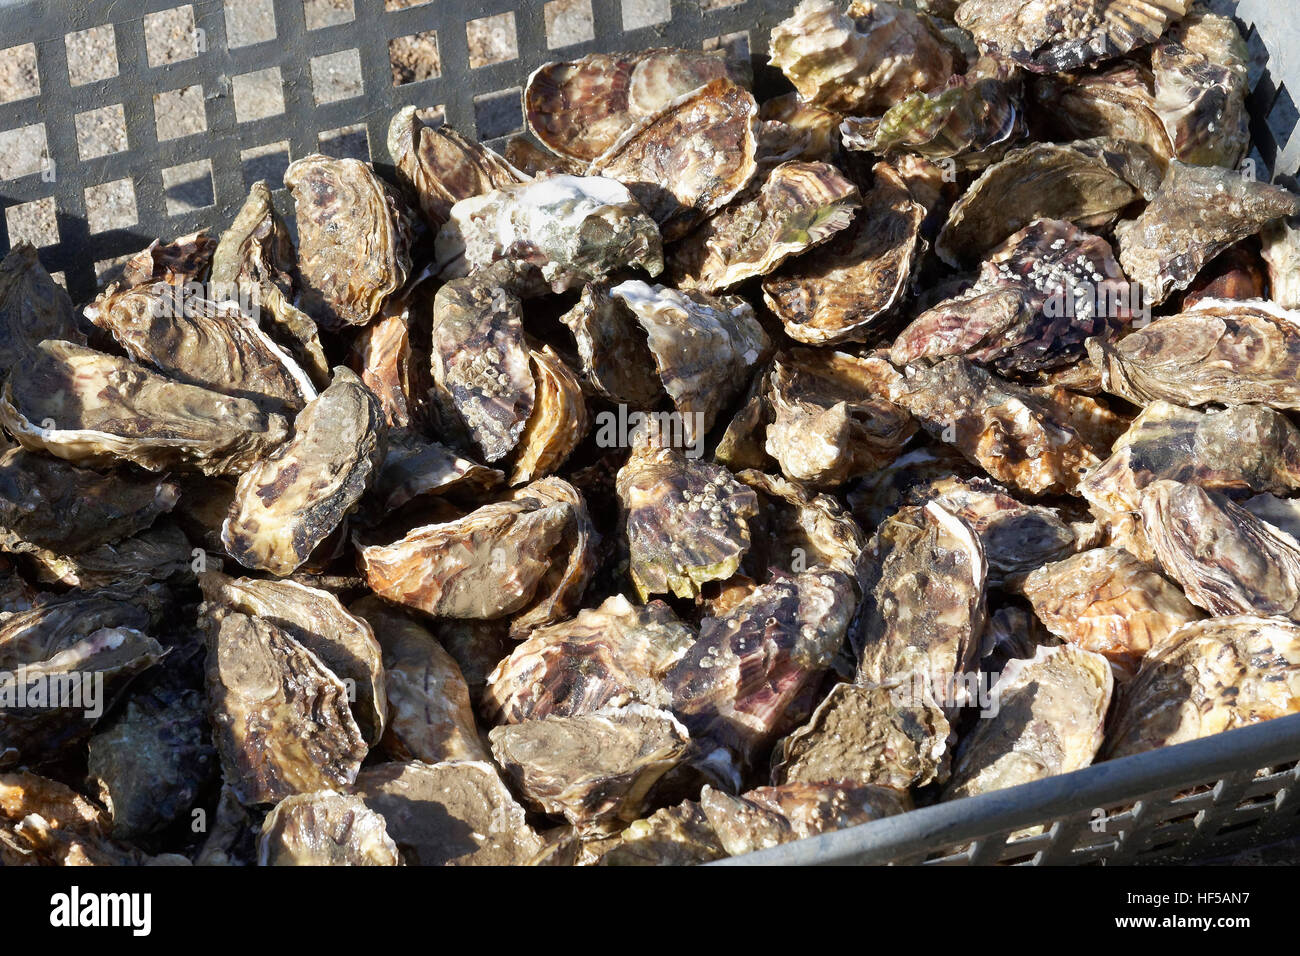 Fresh Marenne oysters, world famous Marenne oyster farming operation, Marennes, Charente-Maritime, France Stock Photo